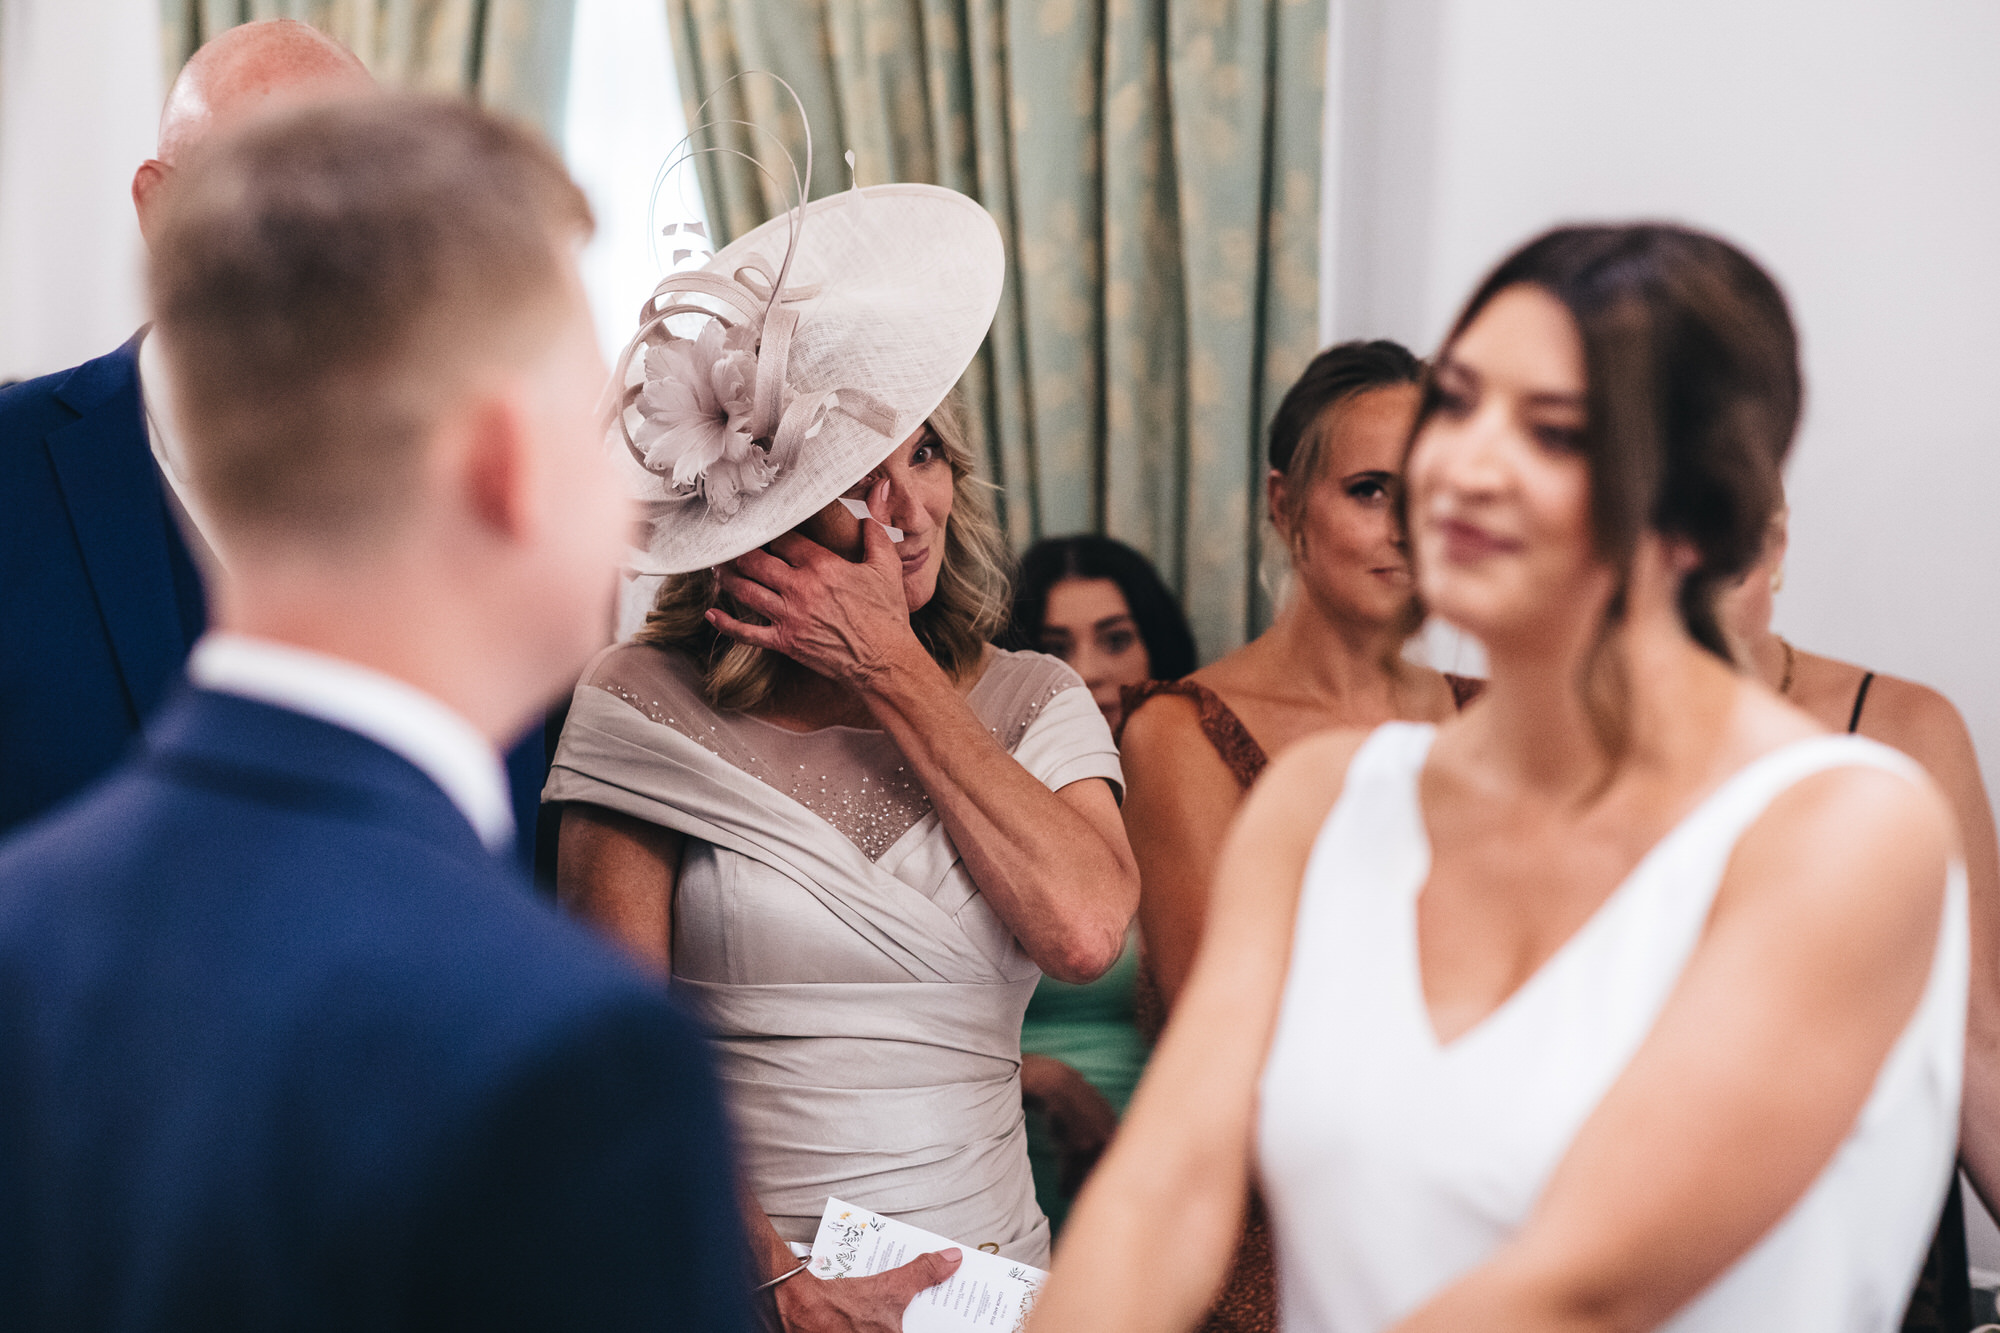 mother crying, wiping tears at ceremony with bride and groom